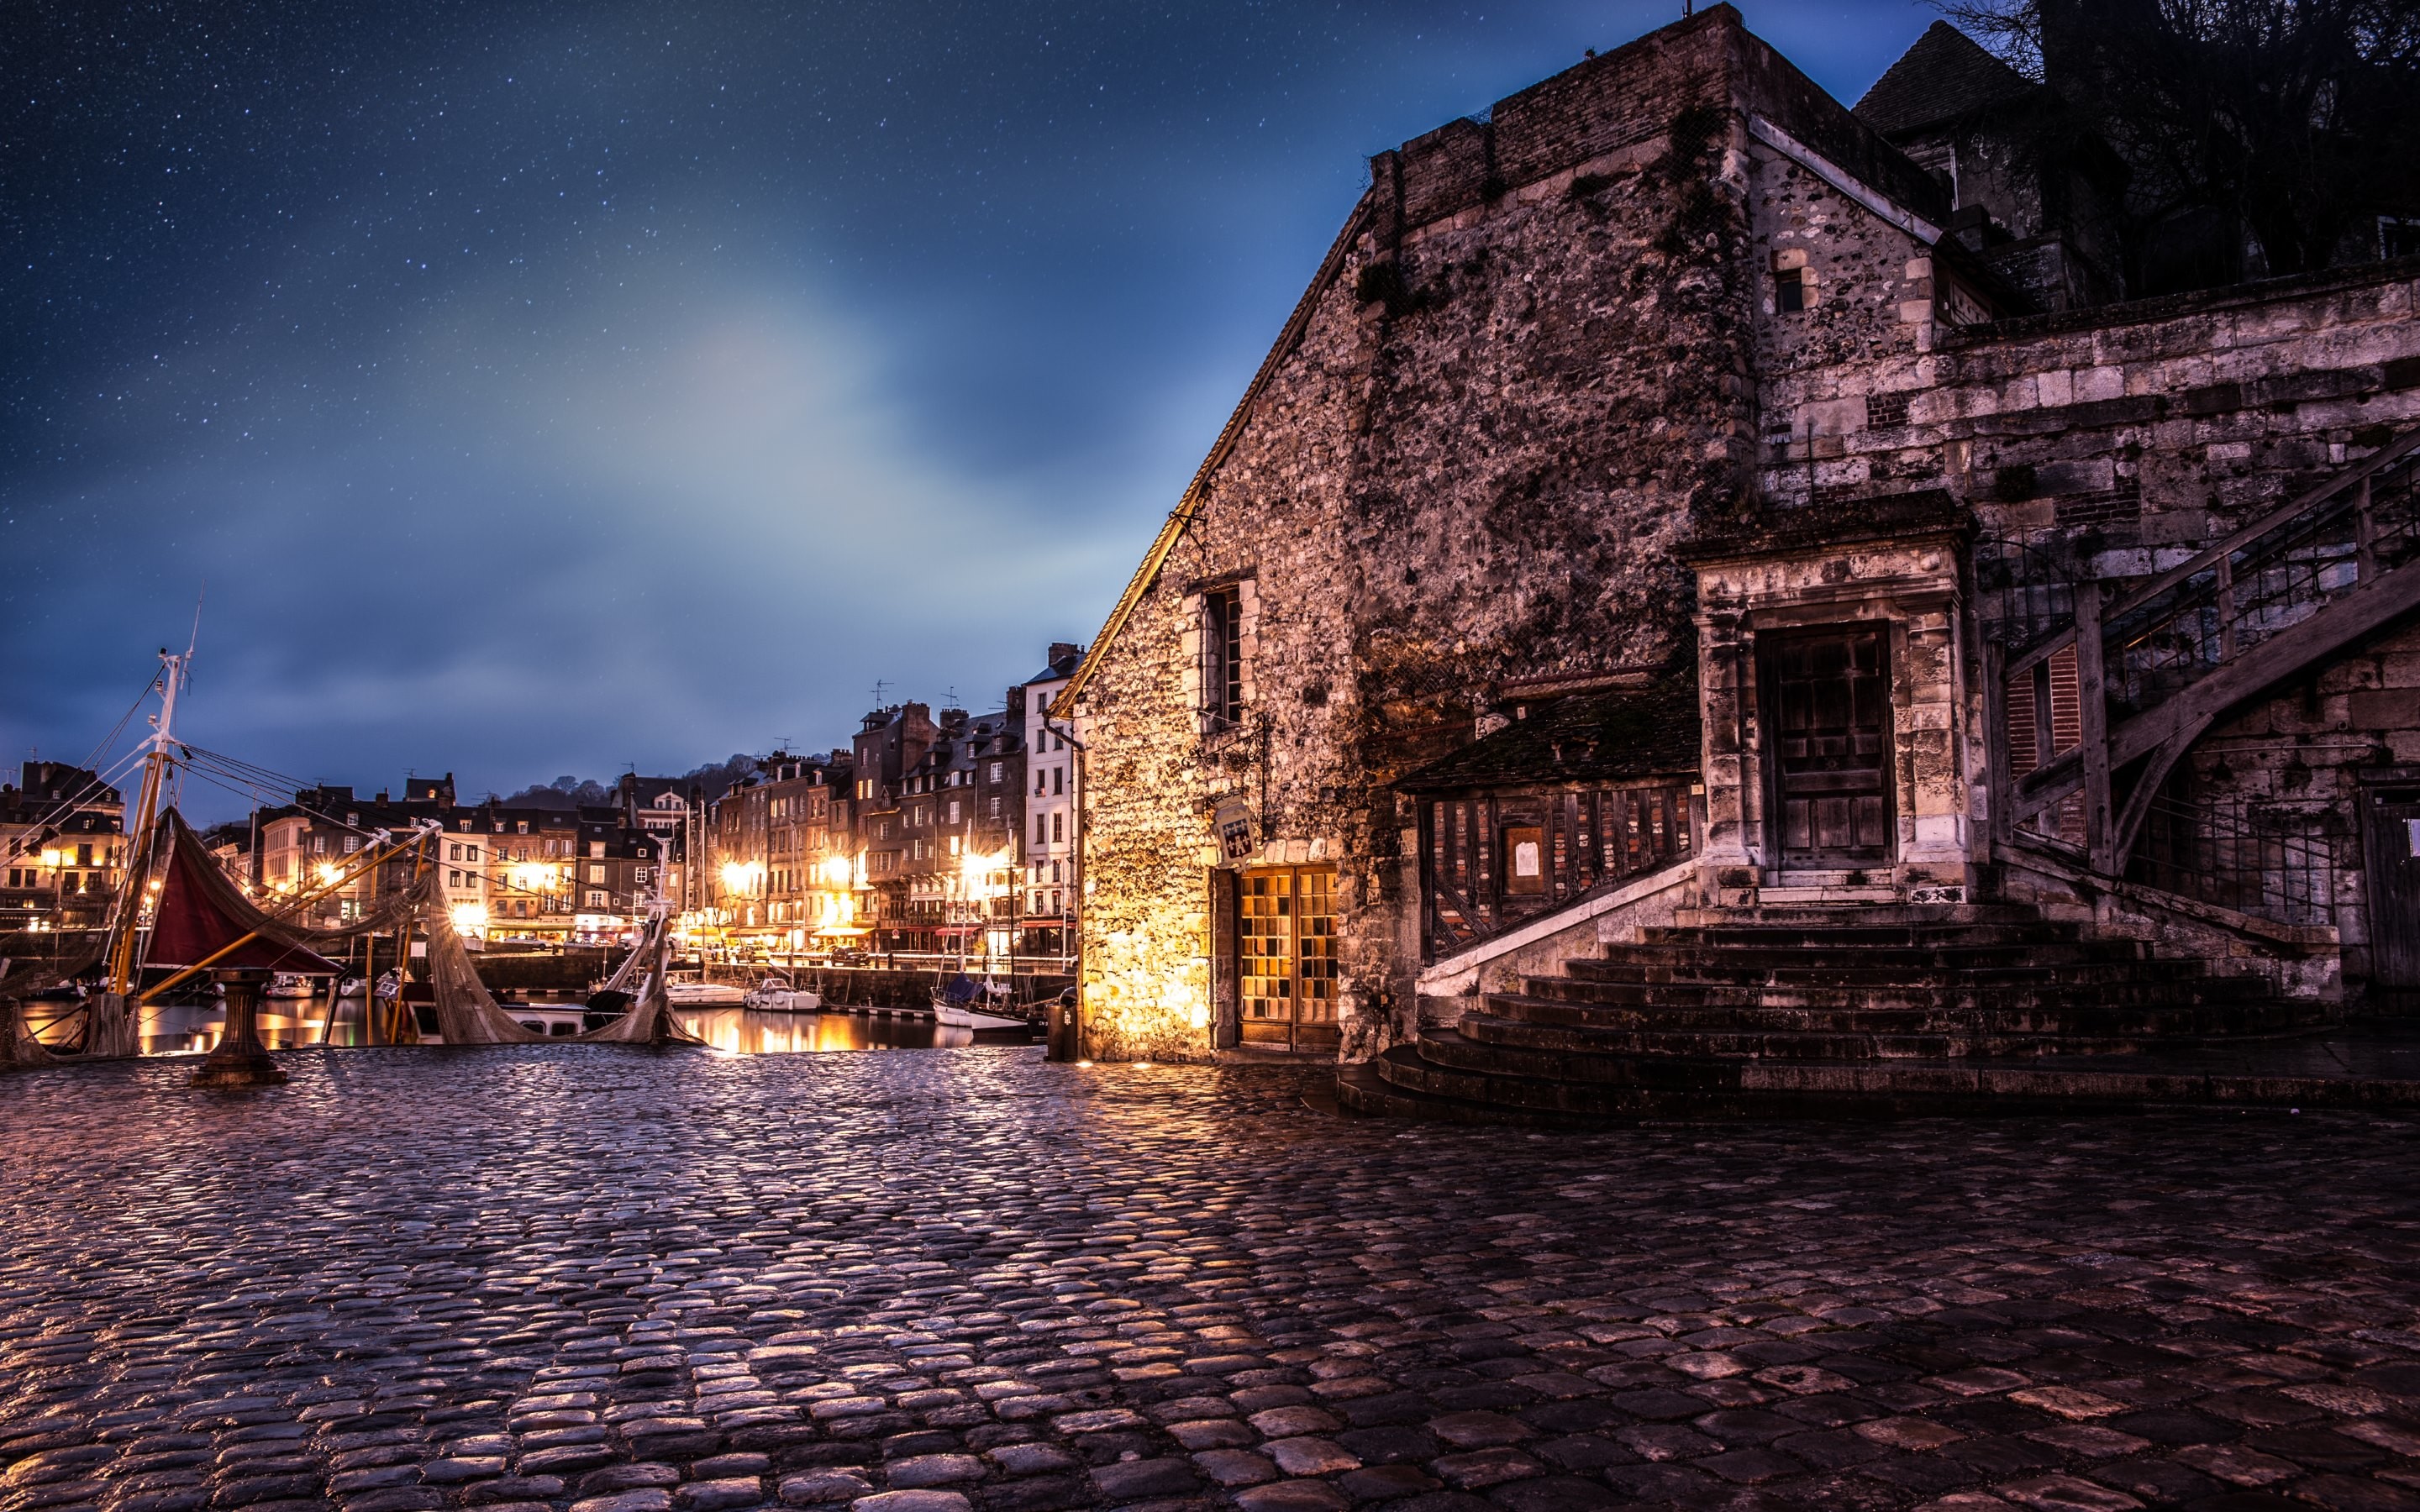 Pictures of Andres are some of the appreciated from entire gallery This new wallpaper with the medieval architecture from Honfleur city in France is